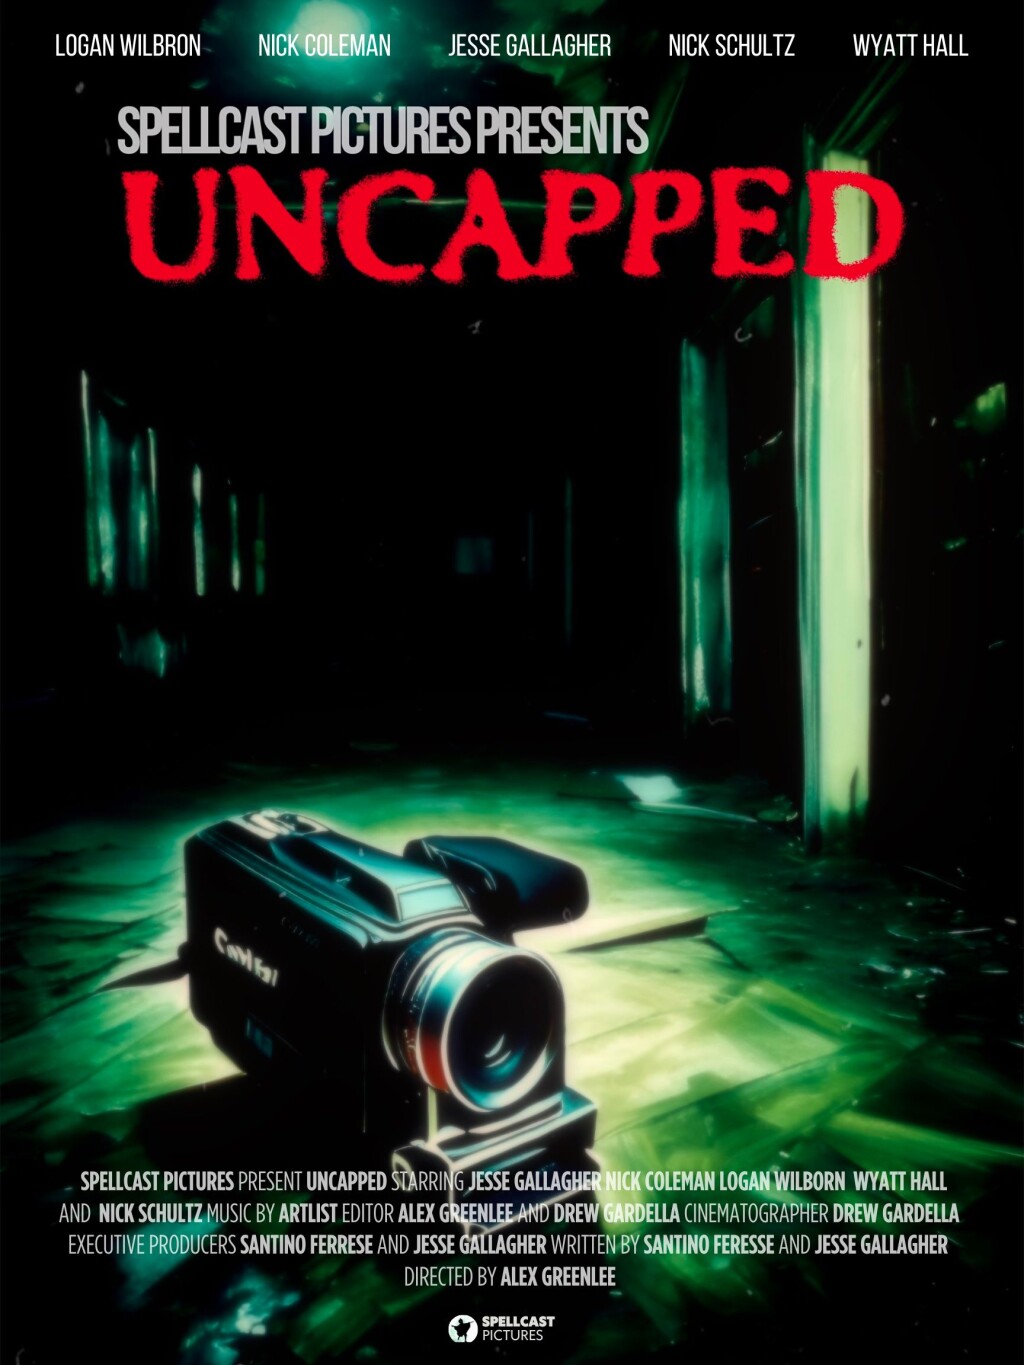 Filmposter for Uncapped